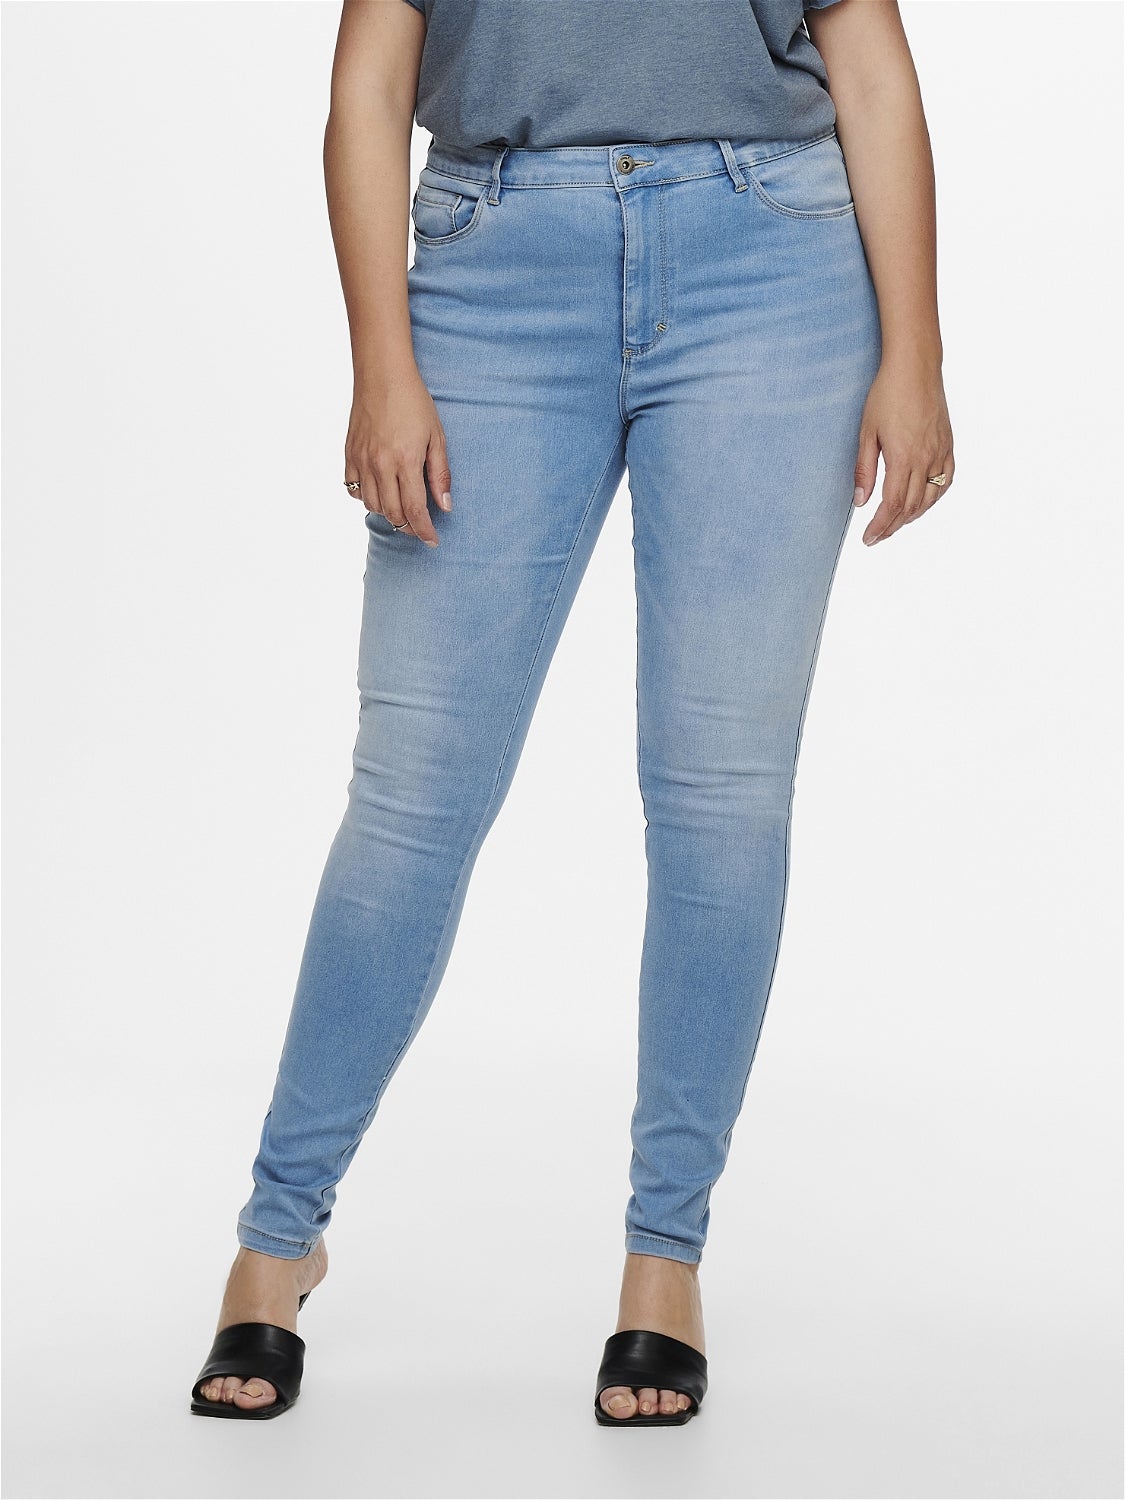 CarAugusta ONLY® Skinny Blue hw fit jeans | Curvy Light |